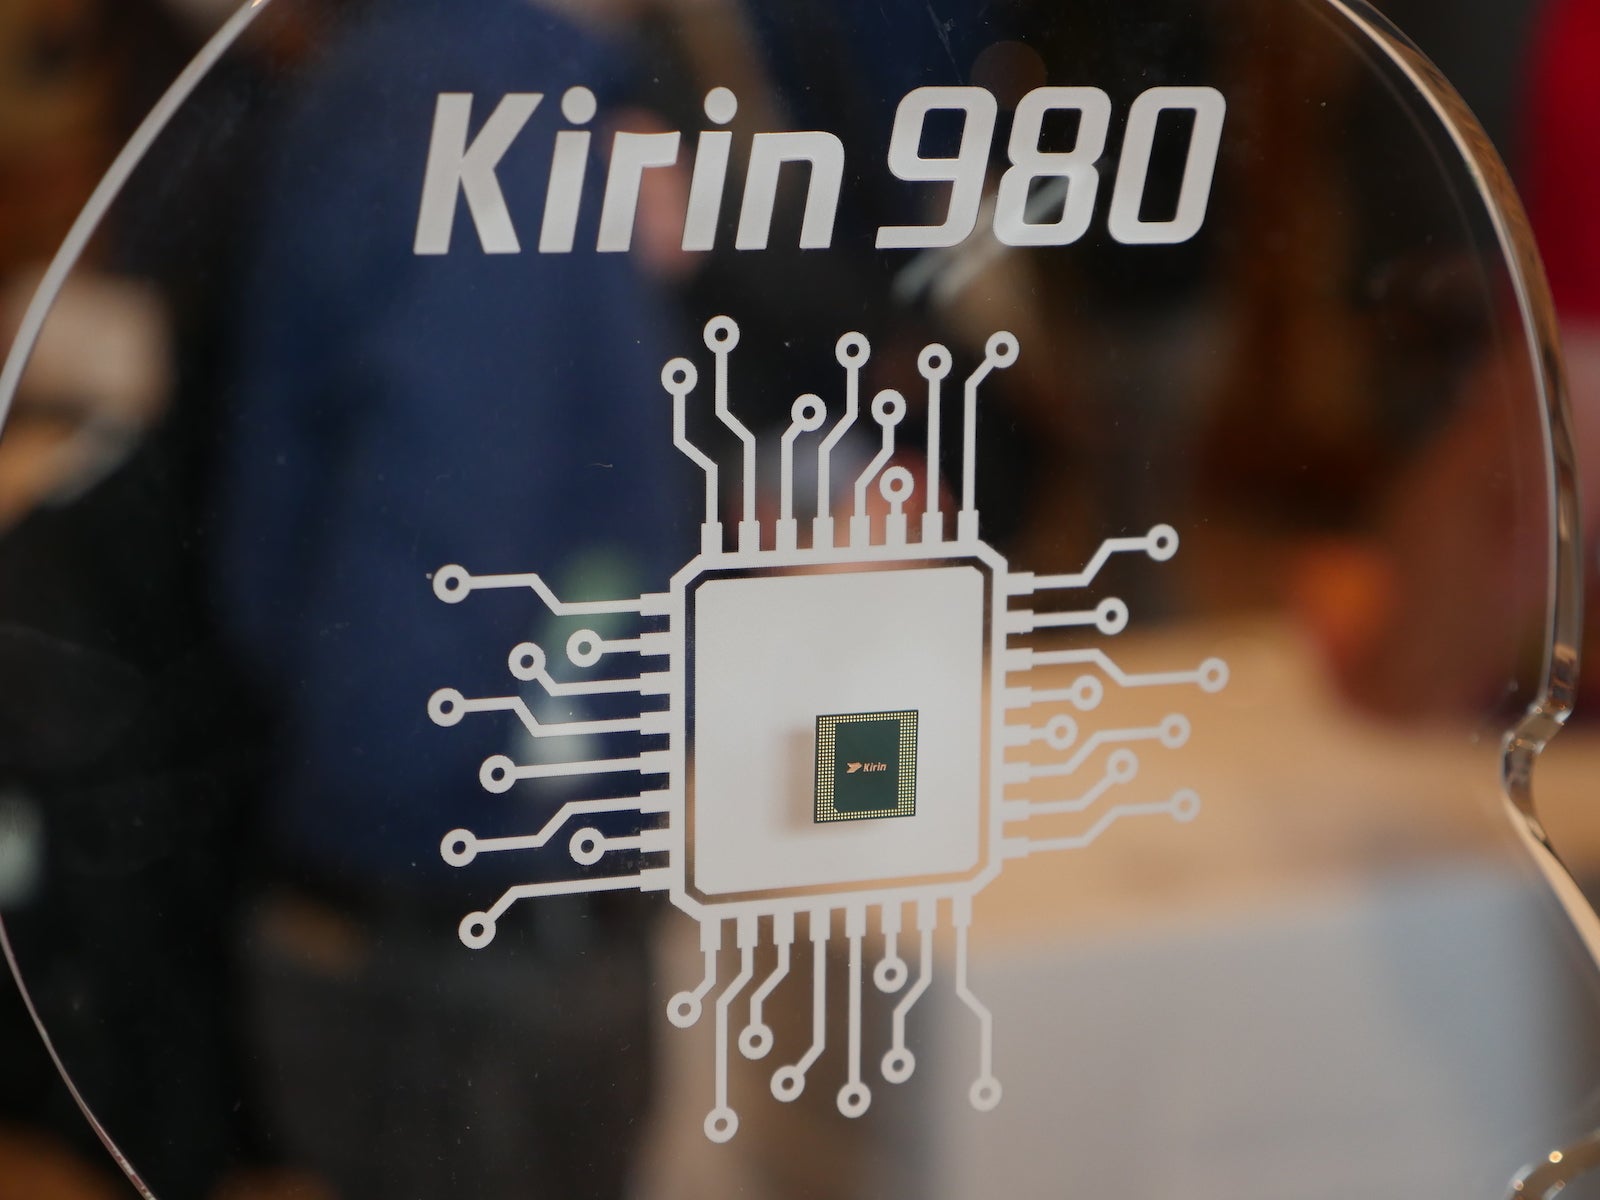 The Kirin 980 is the first Android chip built on the new 7nm technology - Huawei Mate 20 Pro Performance Benchmarks: Kirin 980 inside, Android's first 7nm chip